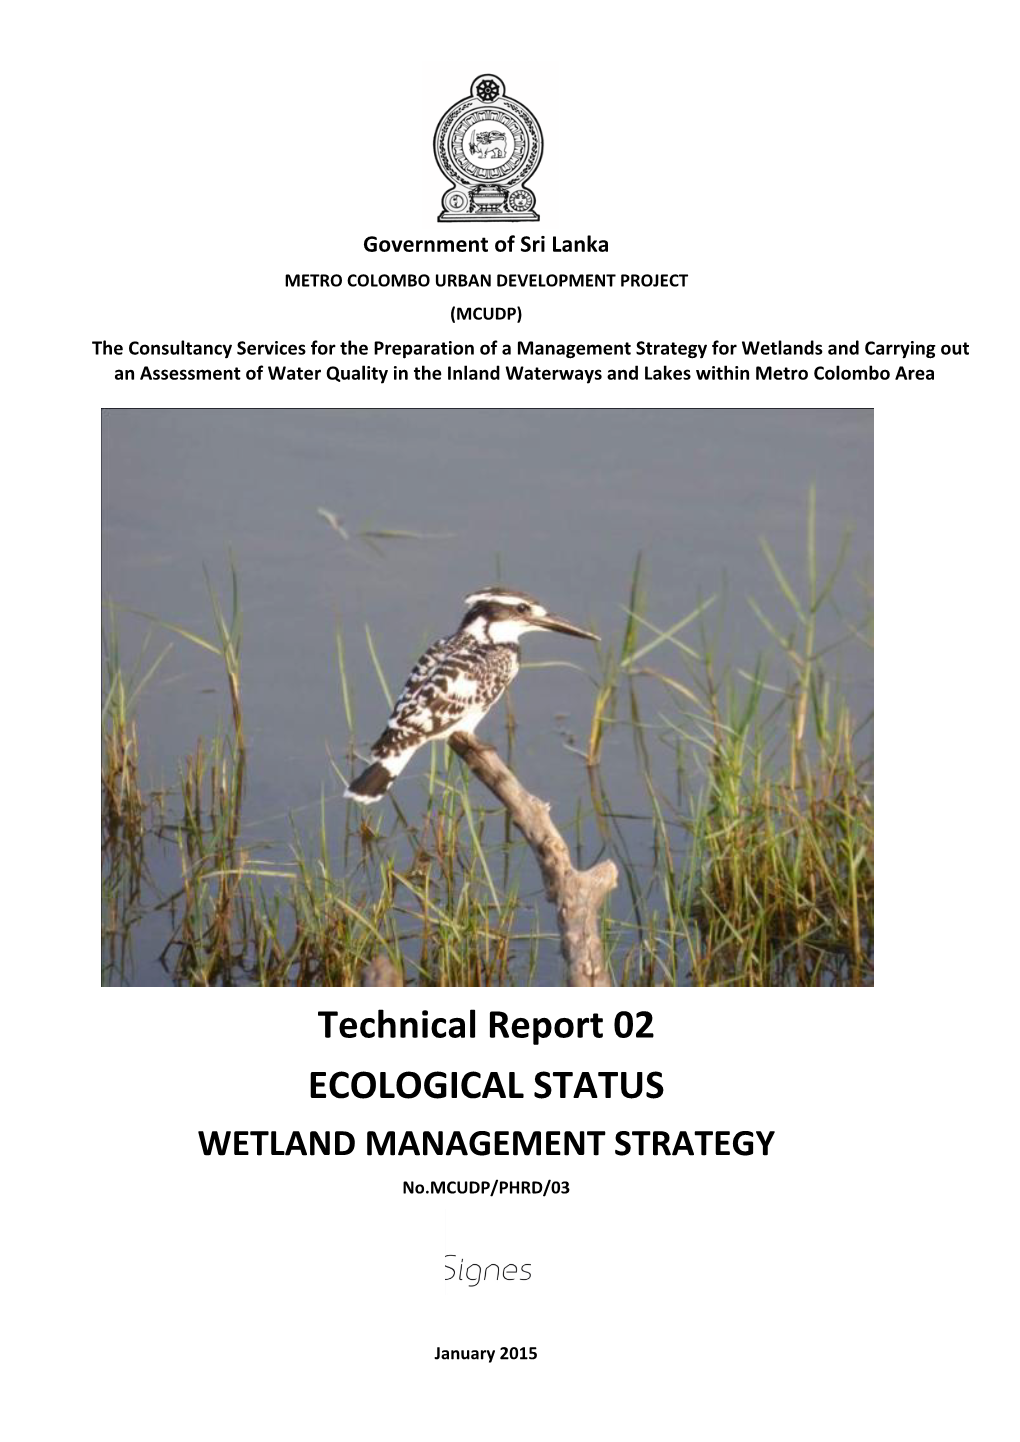 Technical Report 02 ECOLOGICAL STATUS WETLAND MANAGEMENT STRATEGY No.MCUDP/PHRD/03